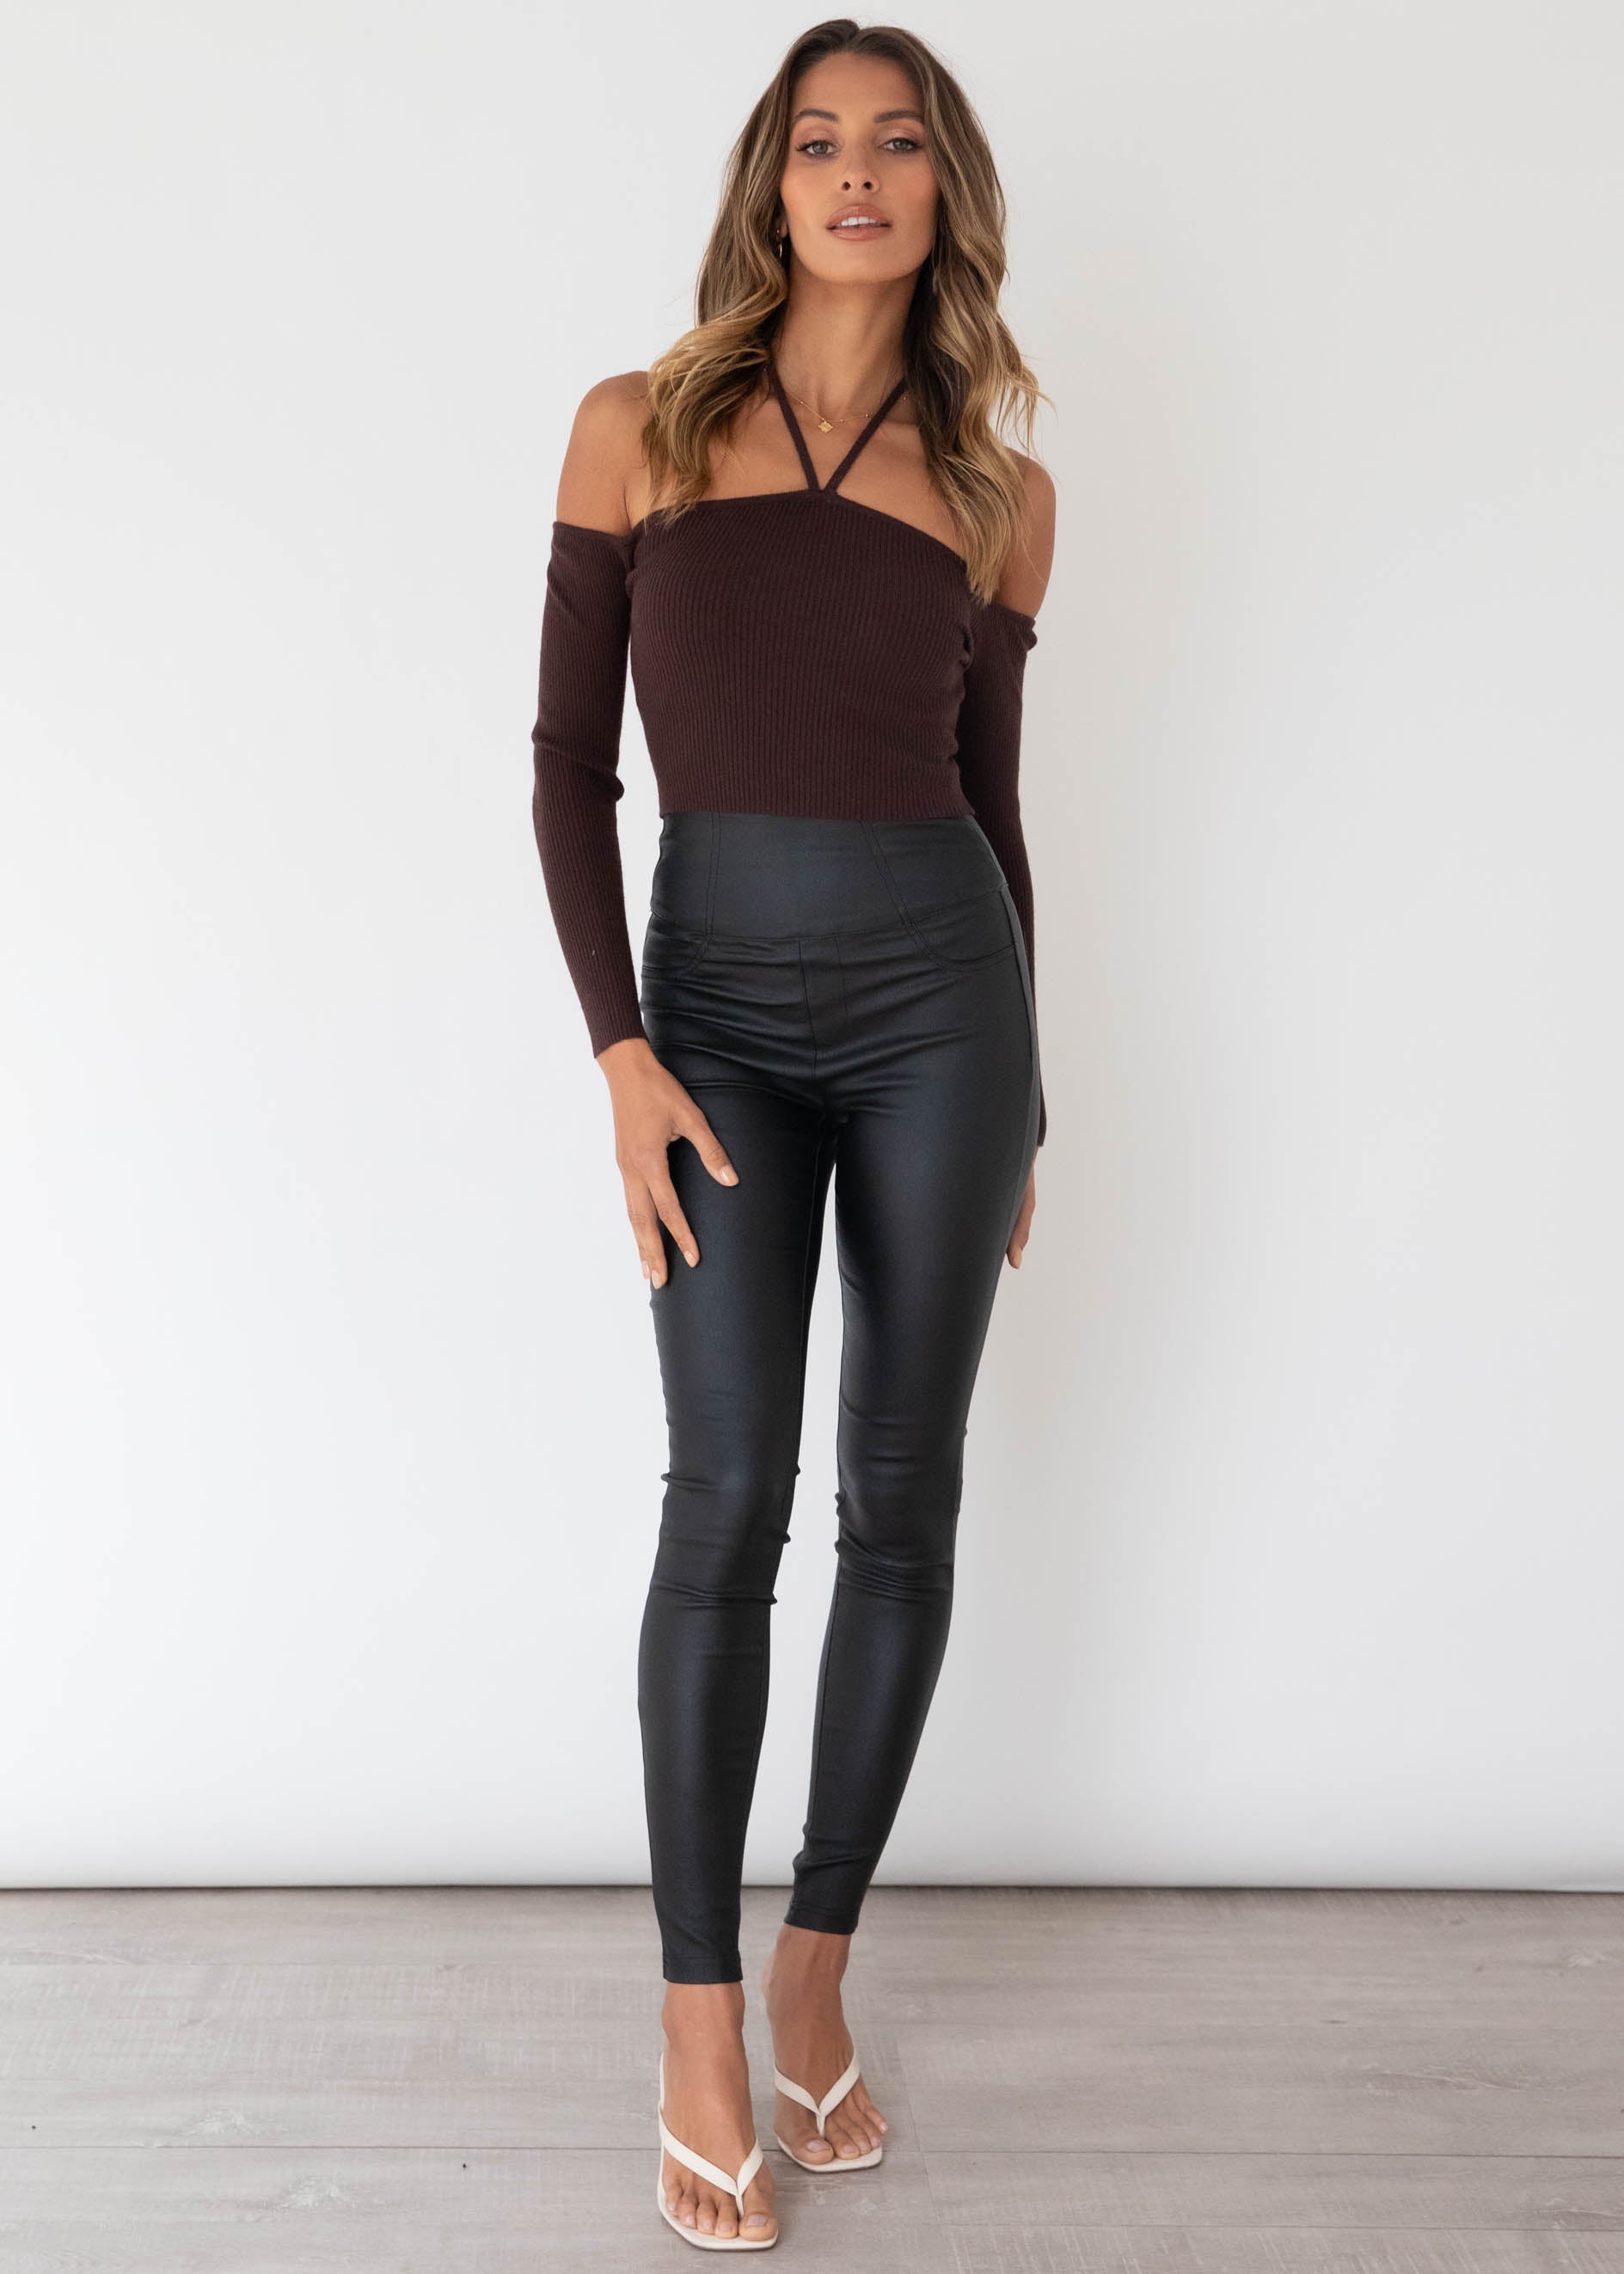 Open Hearts Knit Top - Chocolate